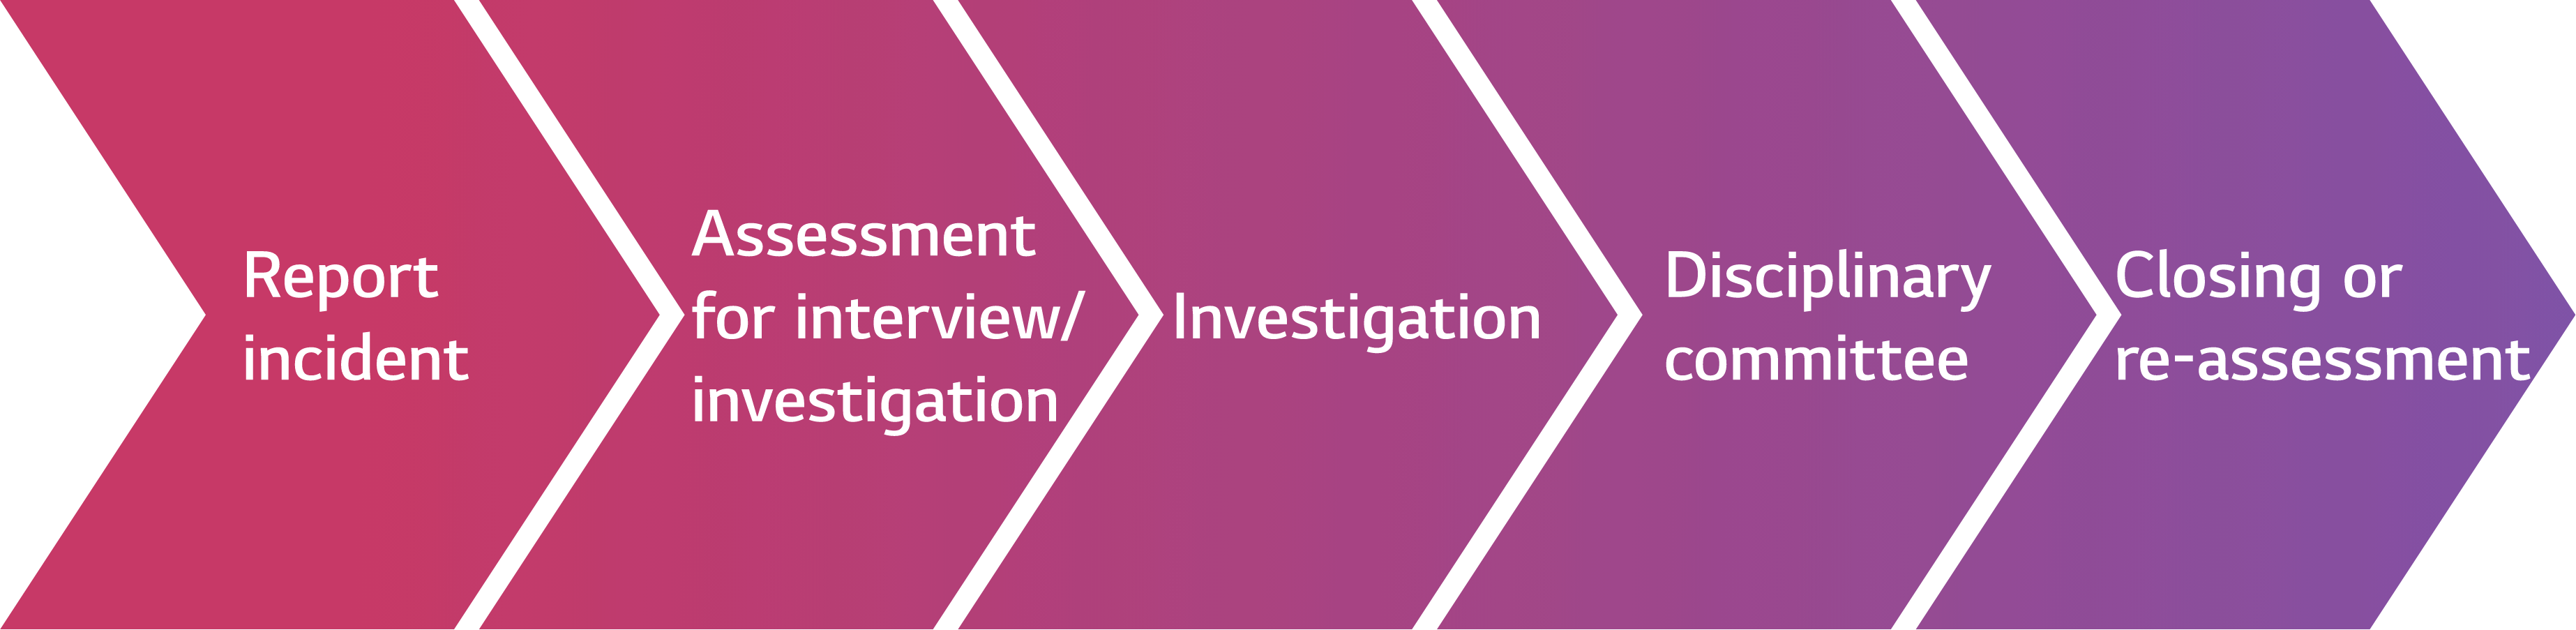 Report incident → Assessment for interview / investigation → Investigation → Disciplinary committee → Closing or re-assessment